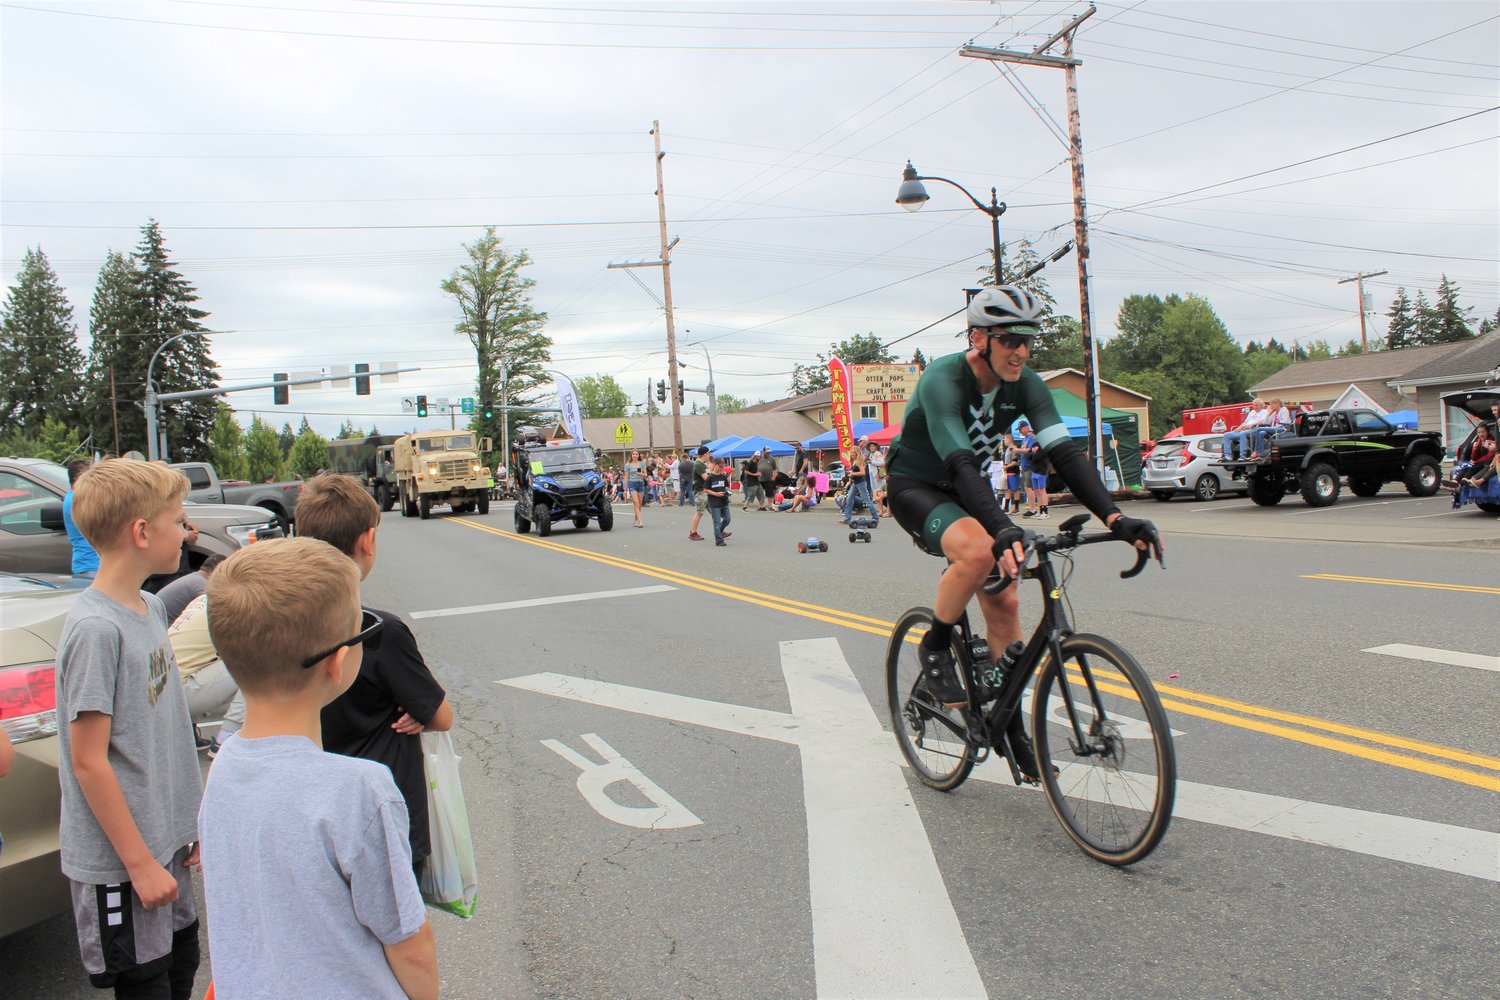 A rider in this weekend's Seattle to Portland Bicycle Classic ended up being a last minute addition to the Napavine Funtime Festival as he ended up riding through town at the same time as the parade.